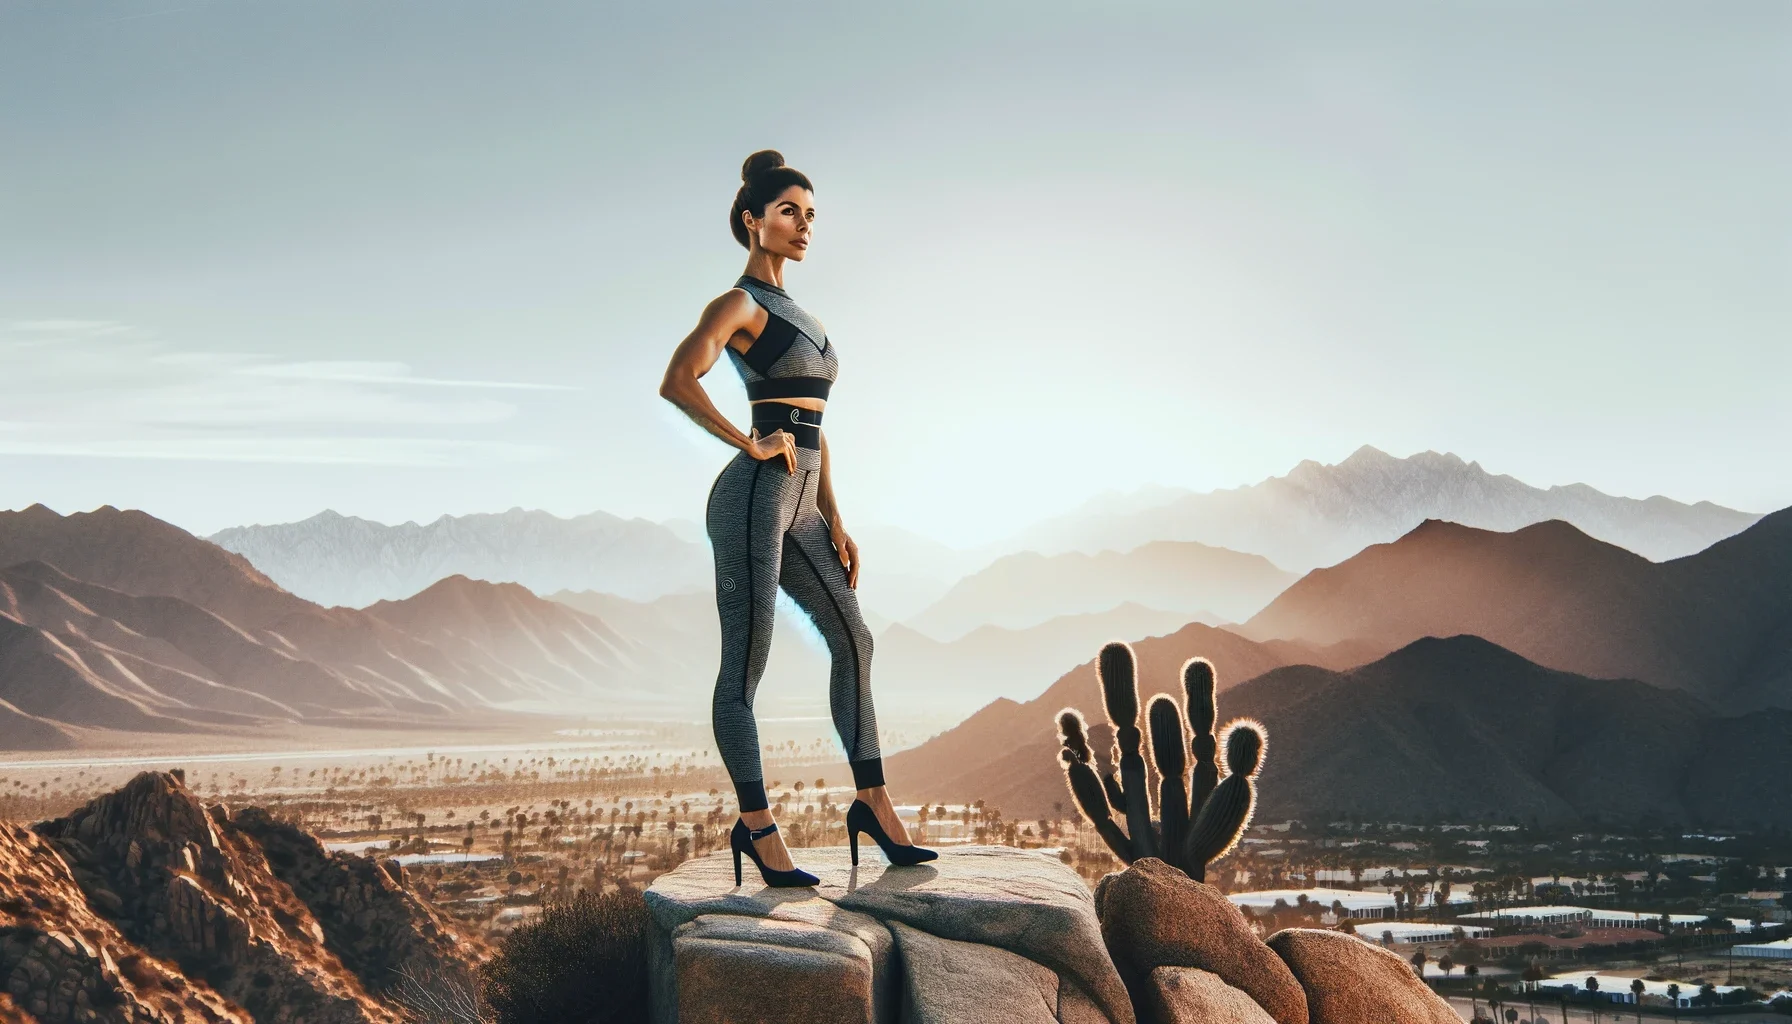 A woman in a stylish leisure outfit and high heels, standing atop a scenic overlook with the Palm Desert mountains in the background, looking refreshed and empowered